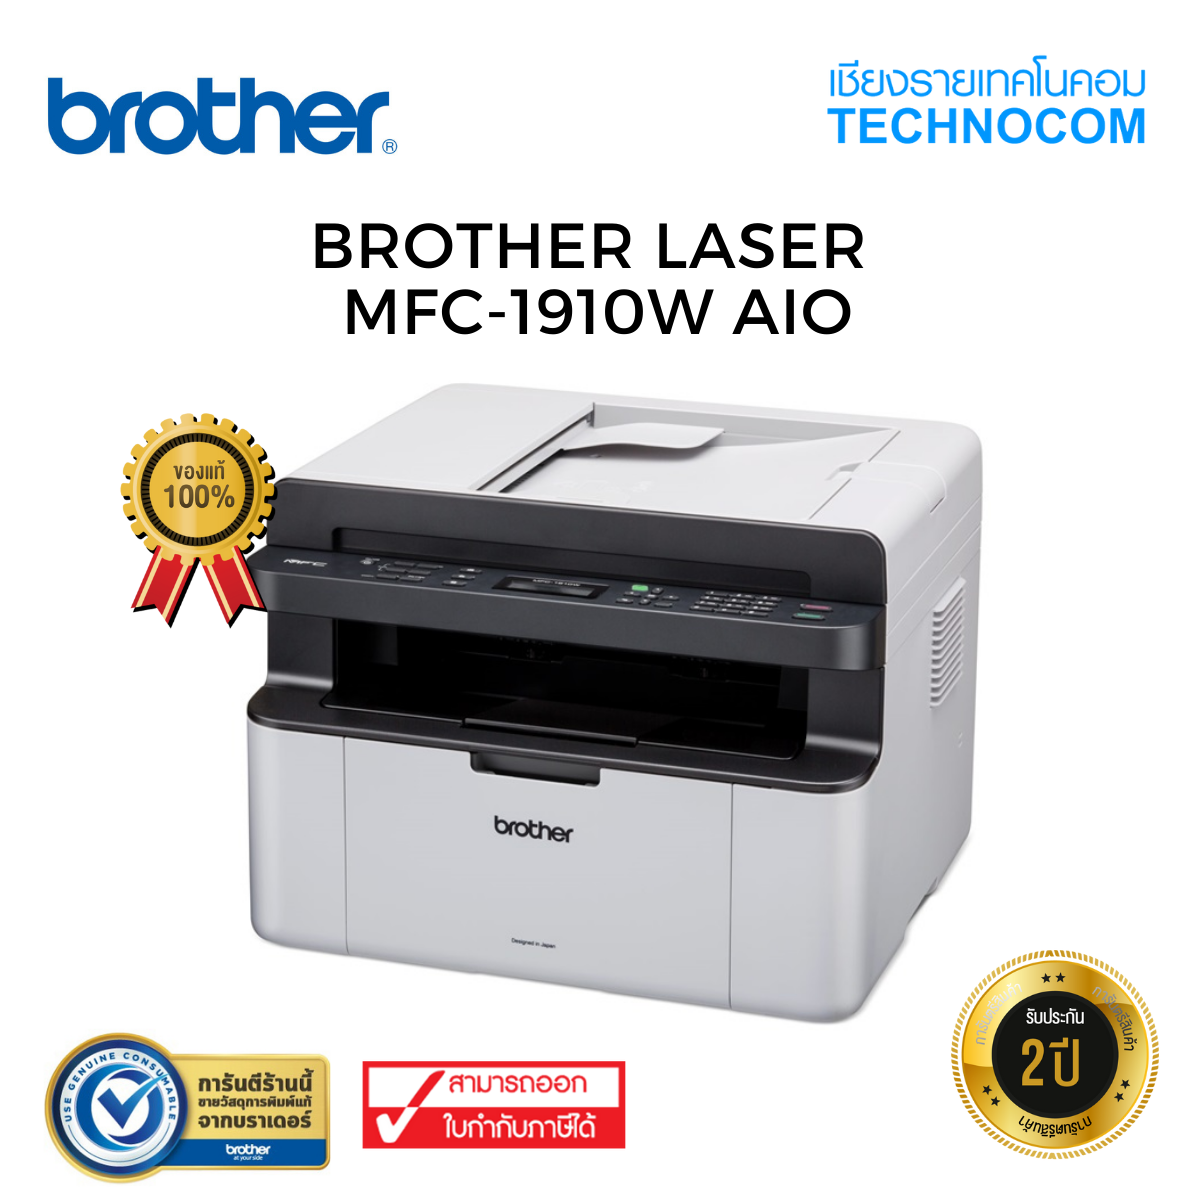 BROTHER LASER MFC-1910W AIO